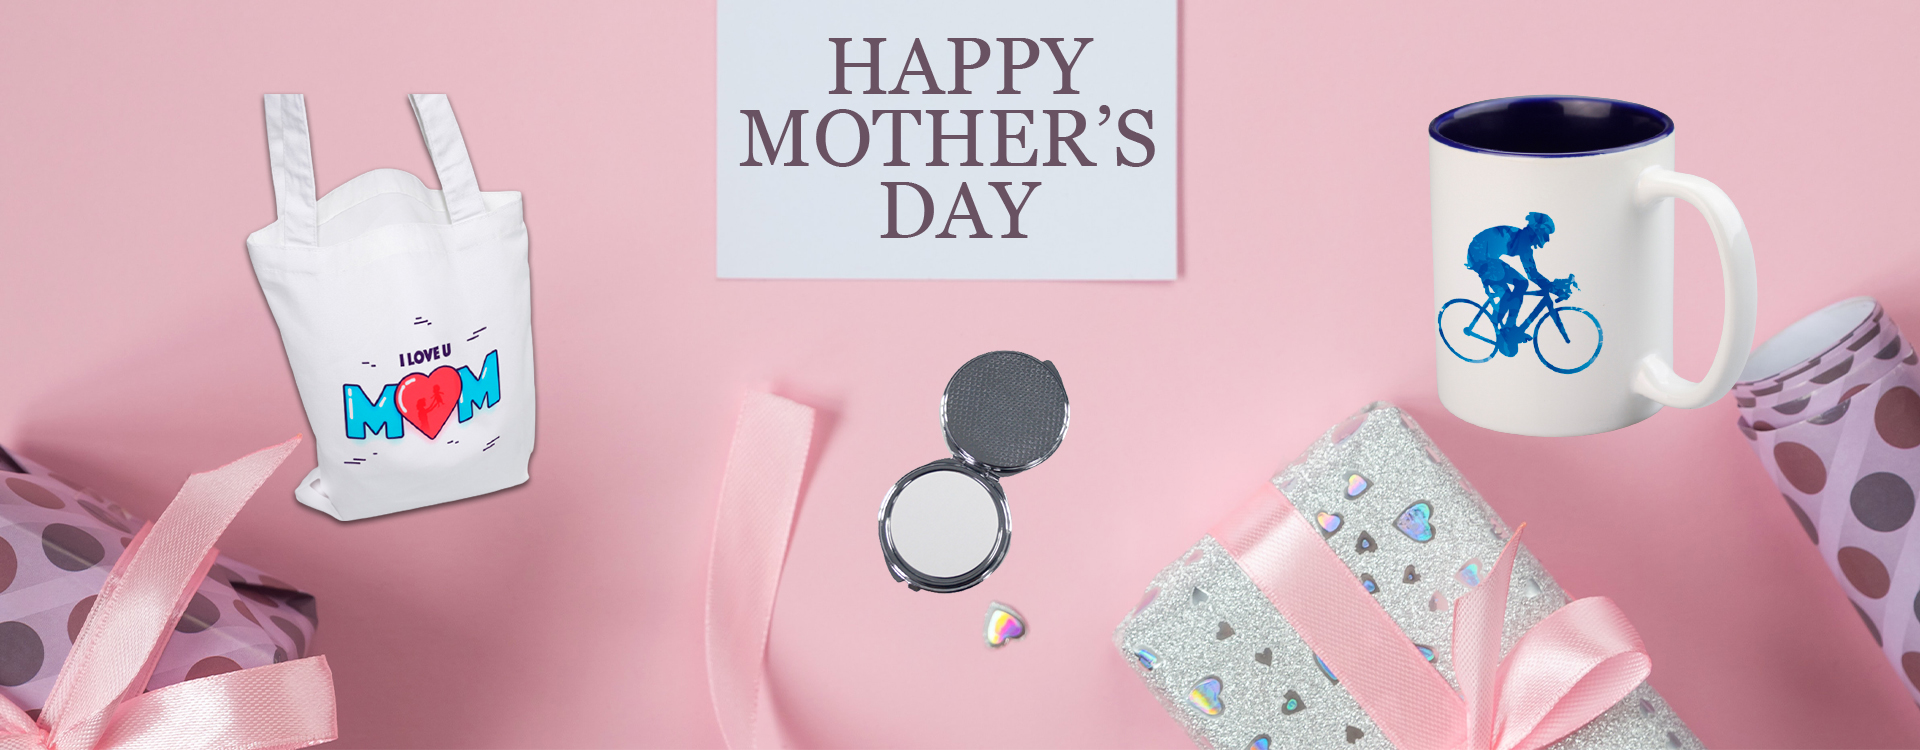 happy mother day and give a beautiful gift to celebrate her